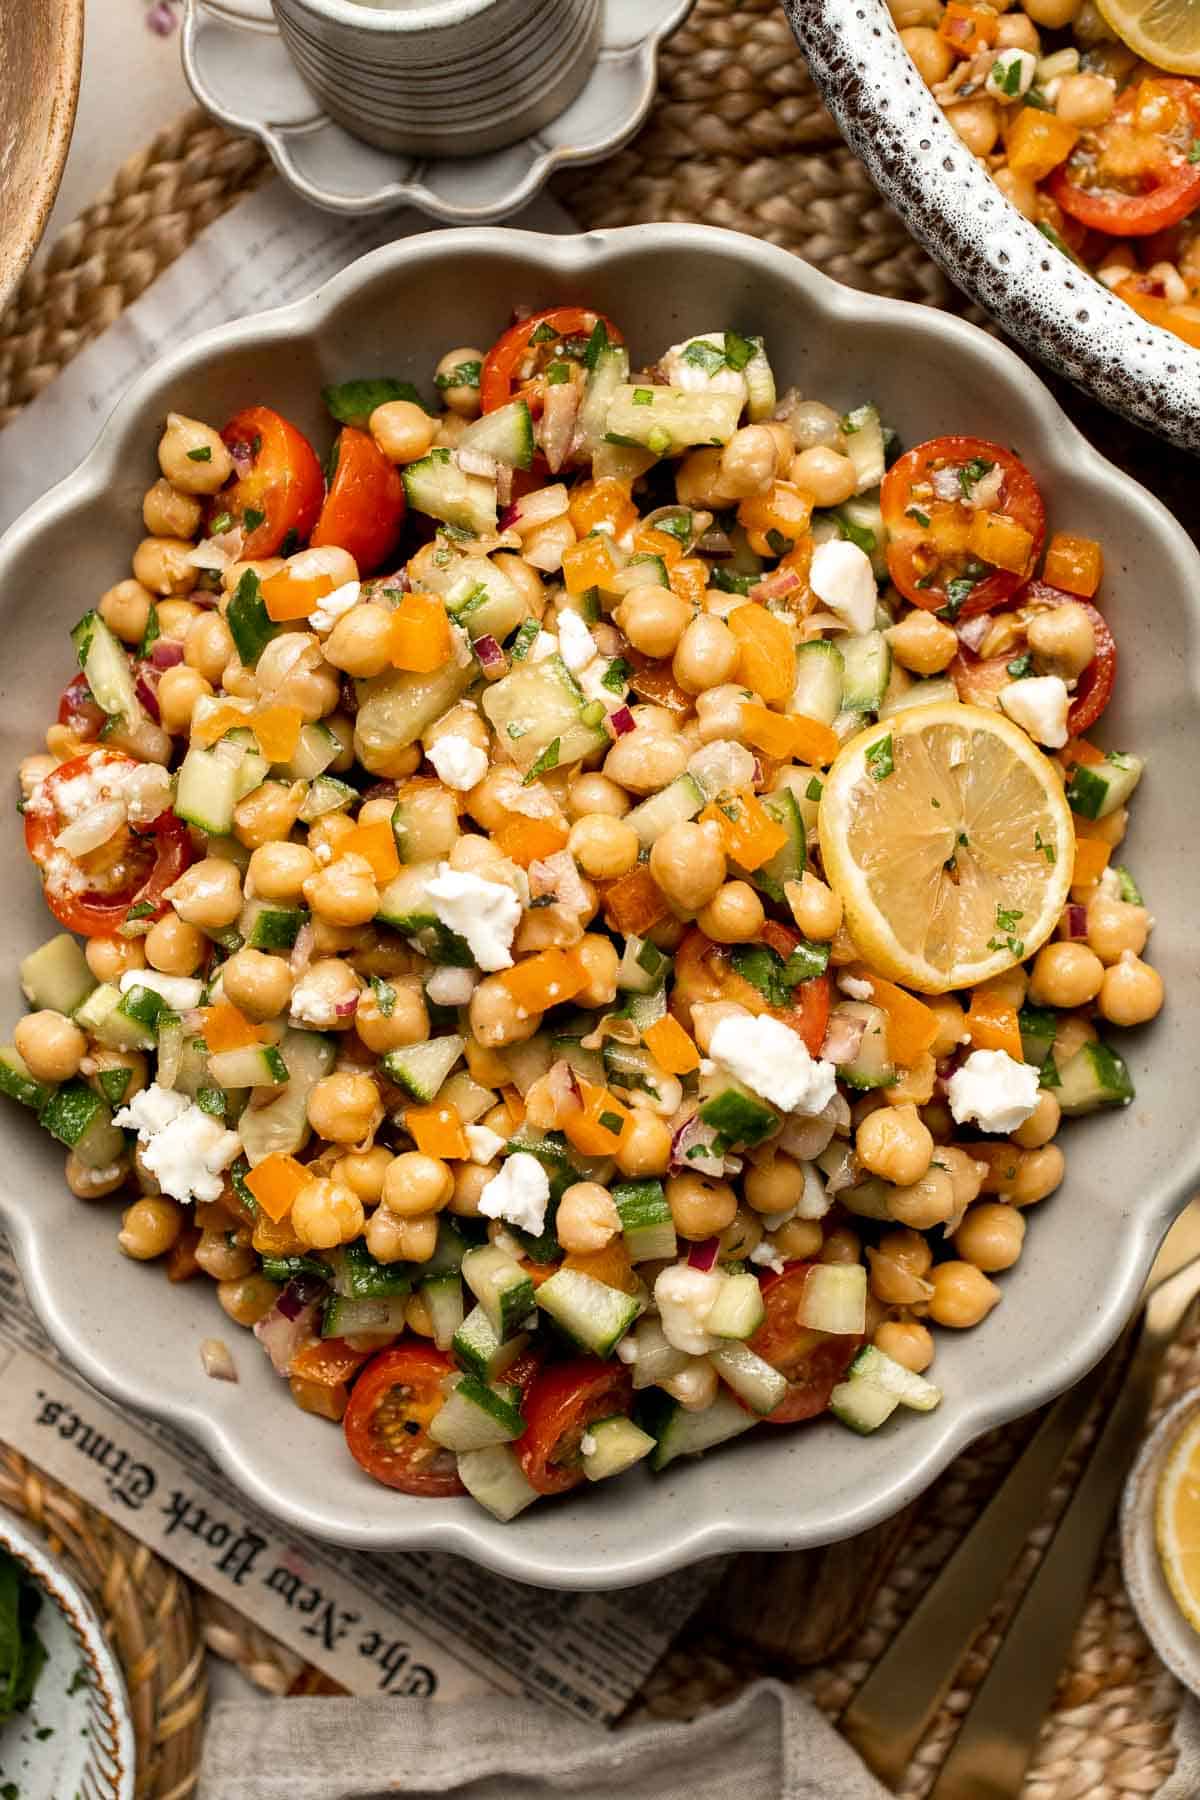 Full of bright flavors and the most delicious balsamic vinaigrette, this Mediterranean Chickpea Salad is the ultimate fresh and healthy salad. | aheadofthyme.com